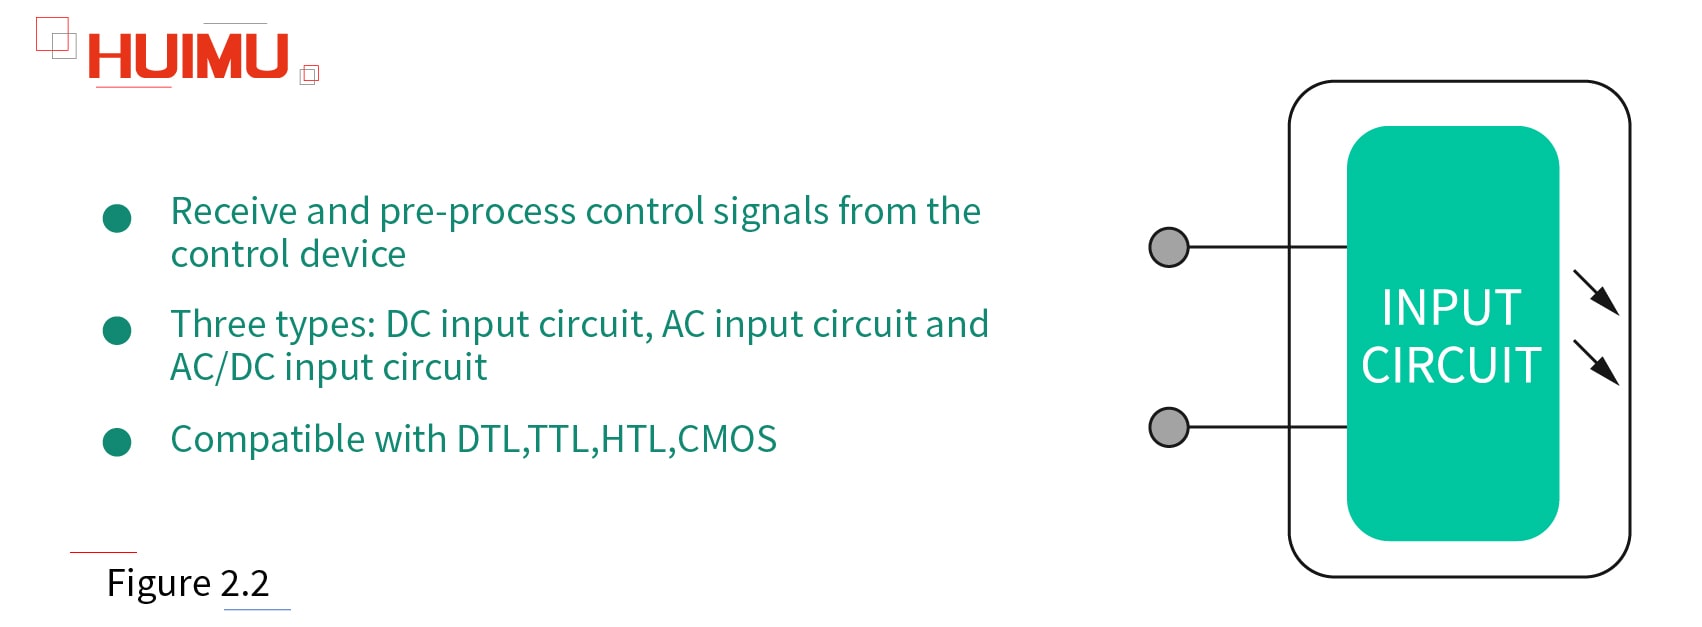 The Input Circuit of the solid state relay provides a loop for the input control signal, making the control signal as a trigger source for the solid state relay. 